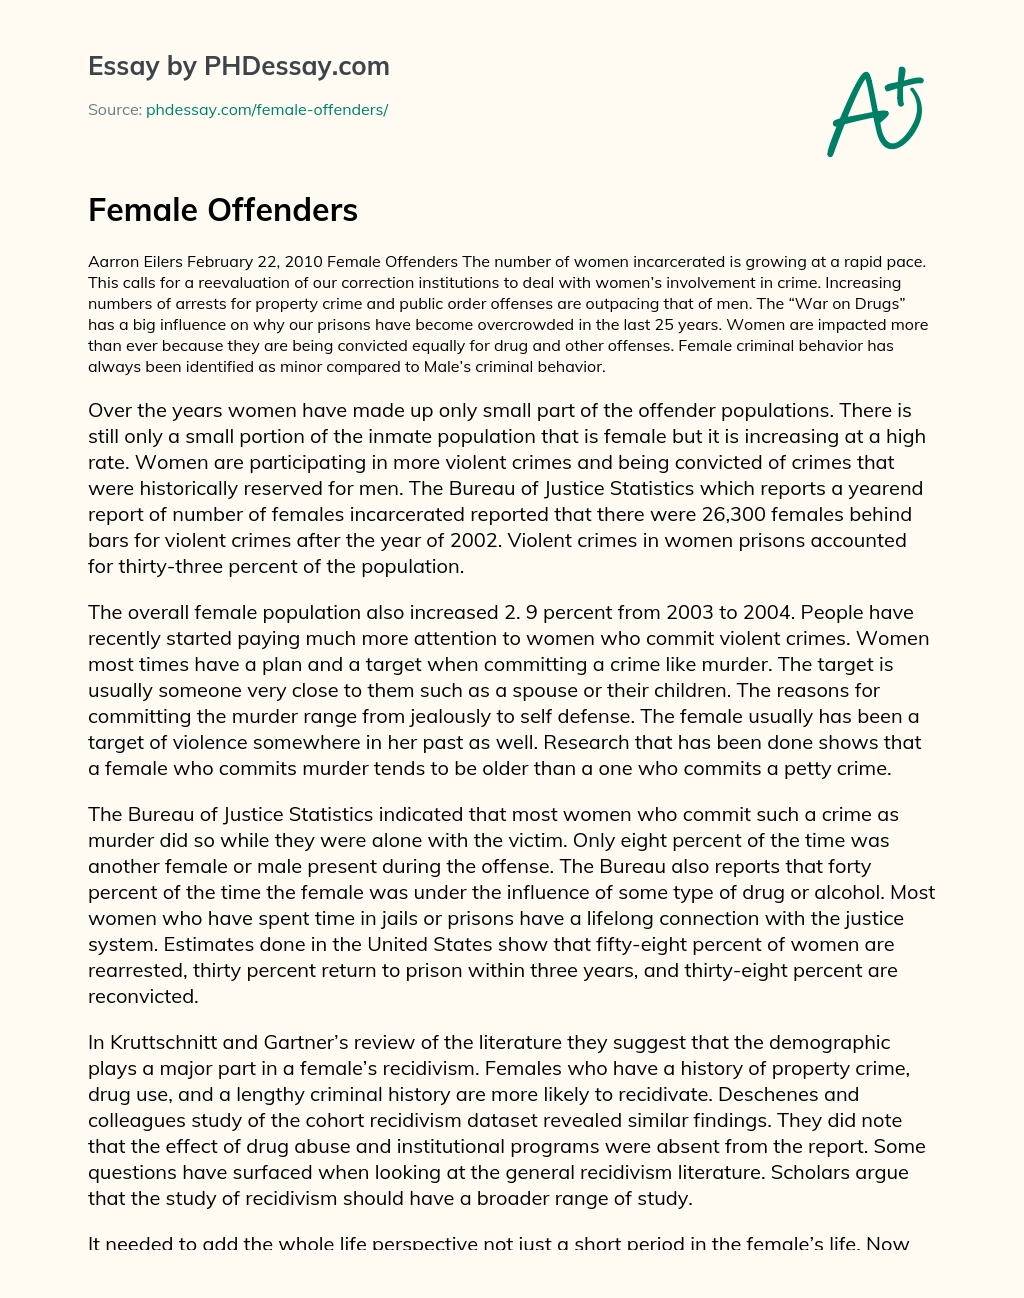 Female Offenders essay